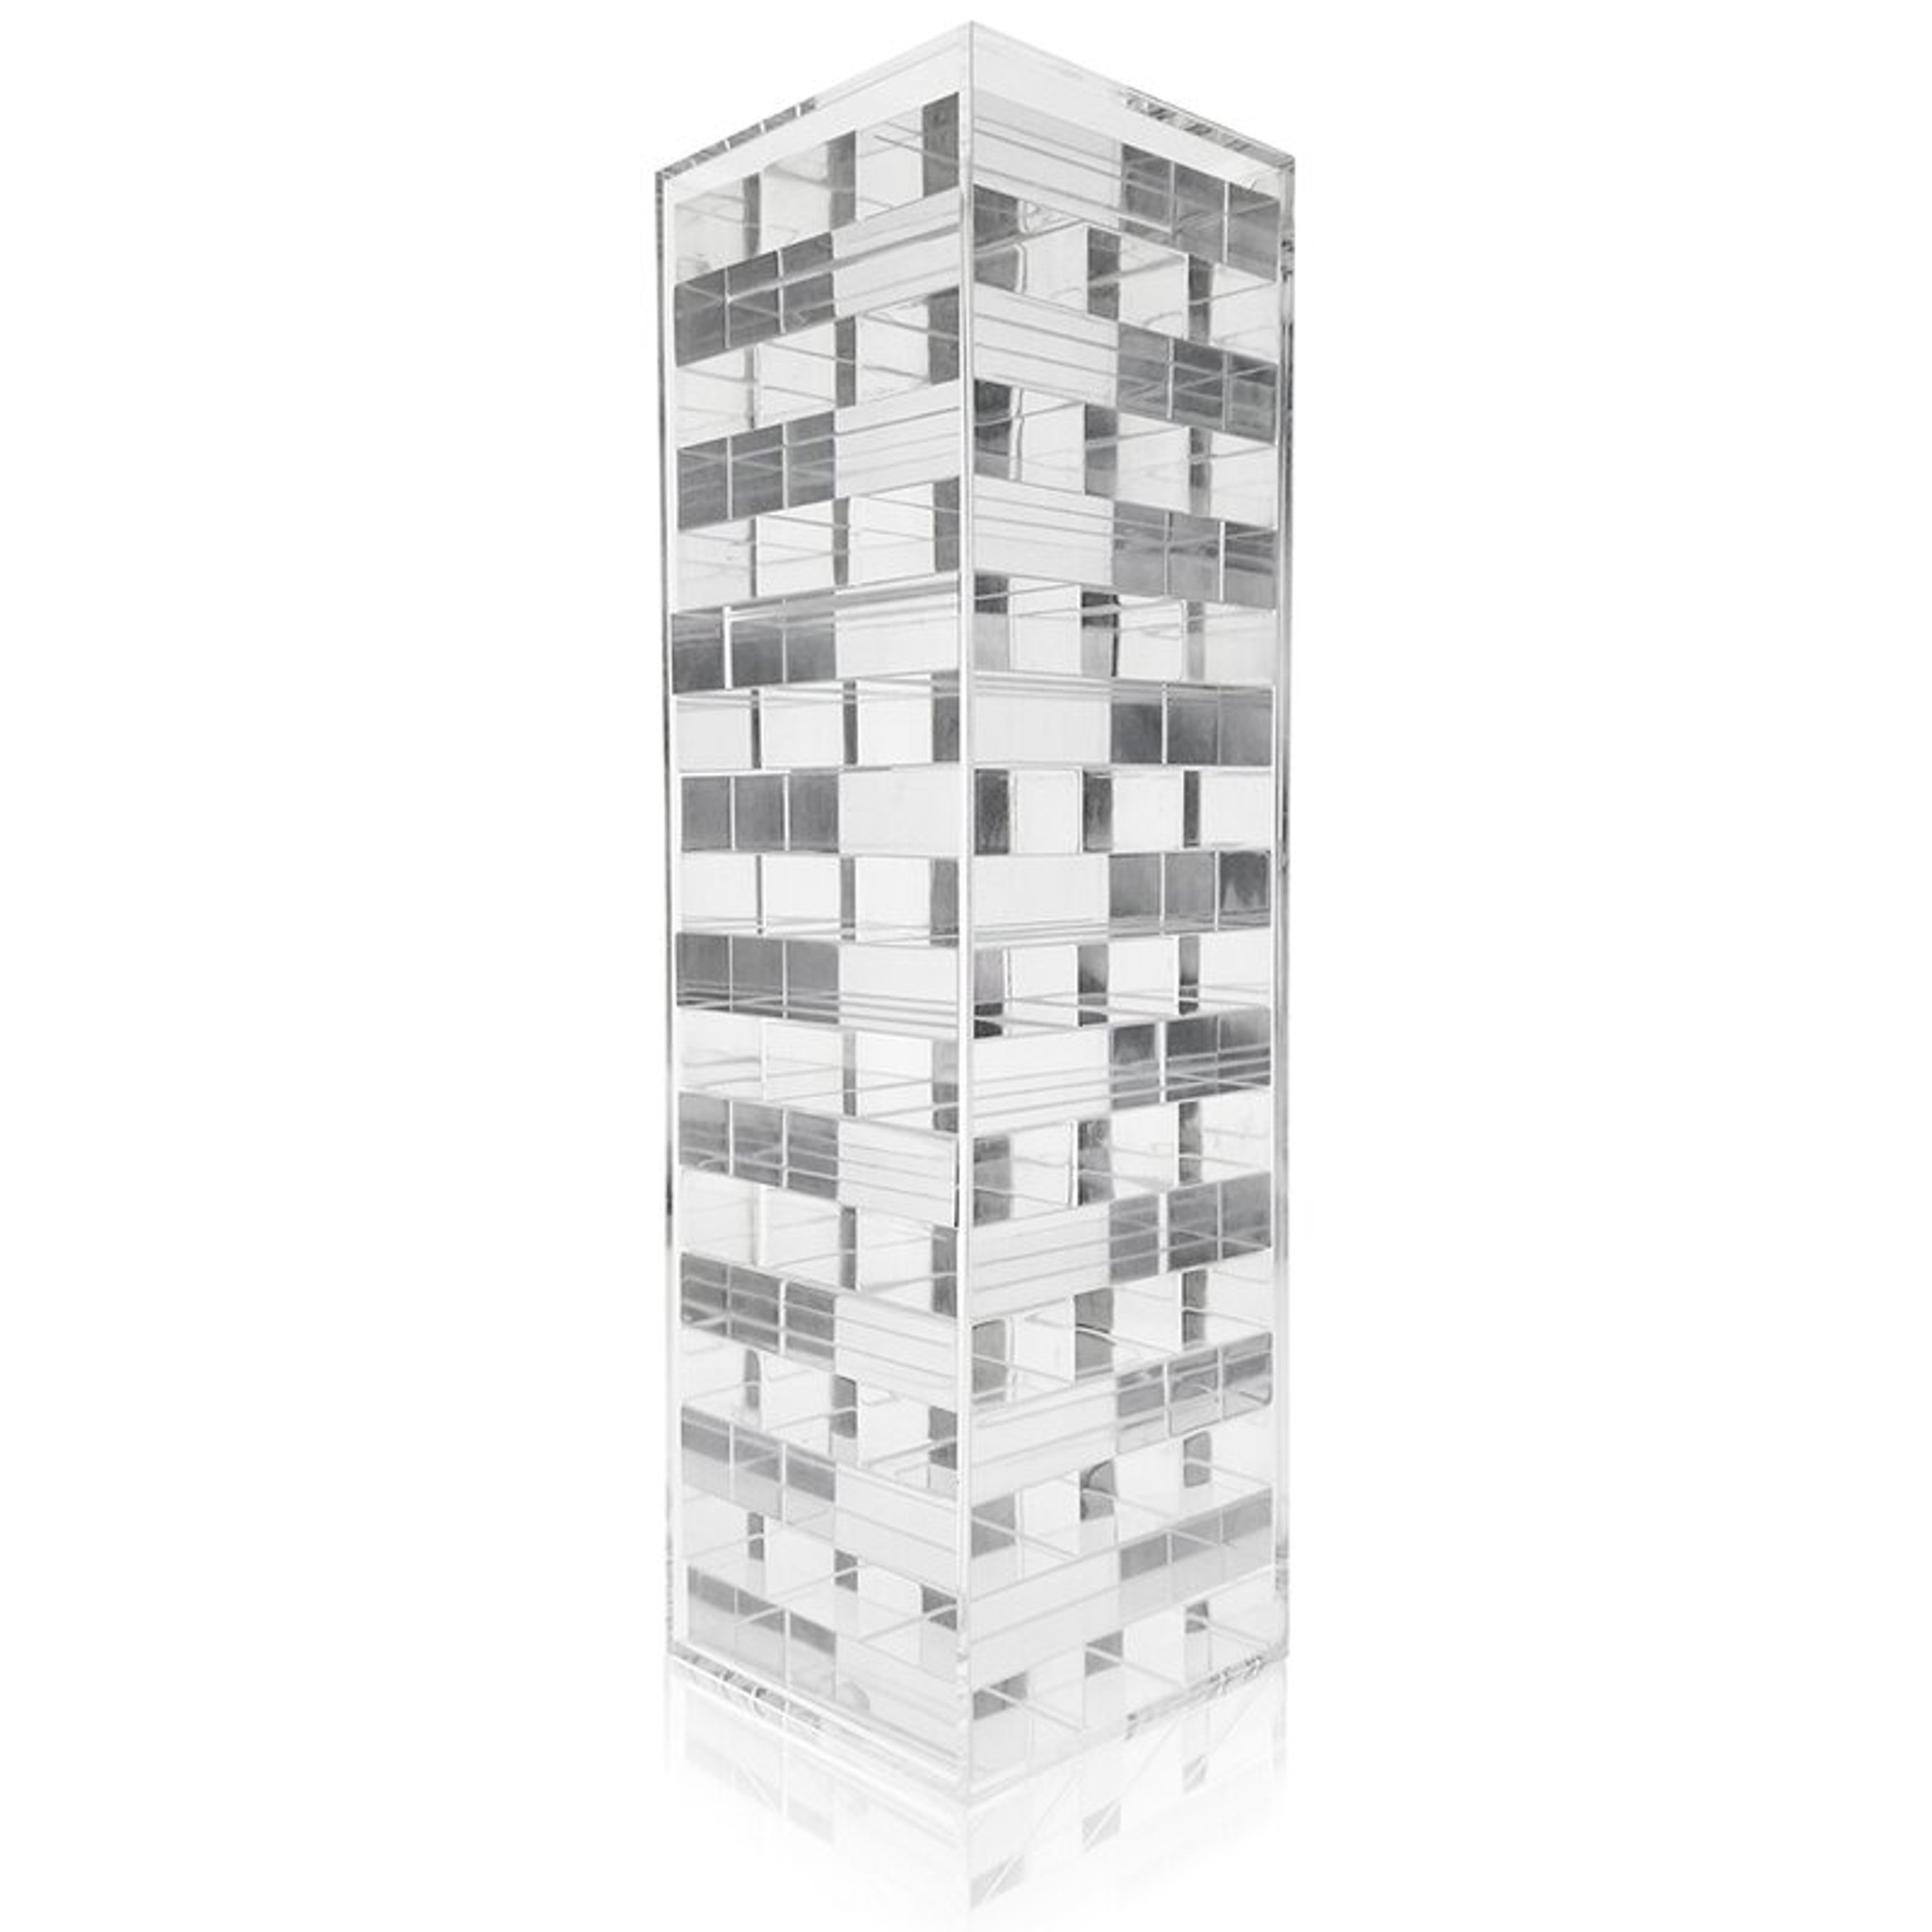 OnDisplay 3D Luxe Acrylic Stacking Tower Puzzle Game clear lucite jumble